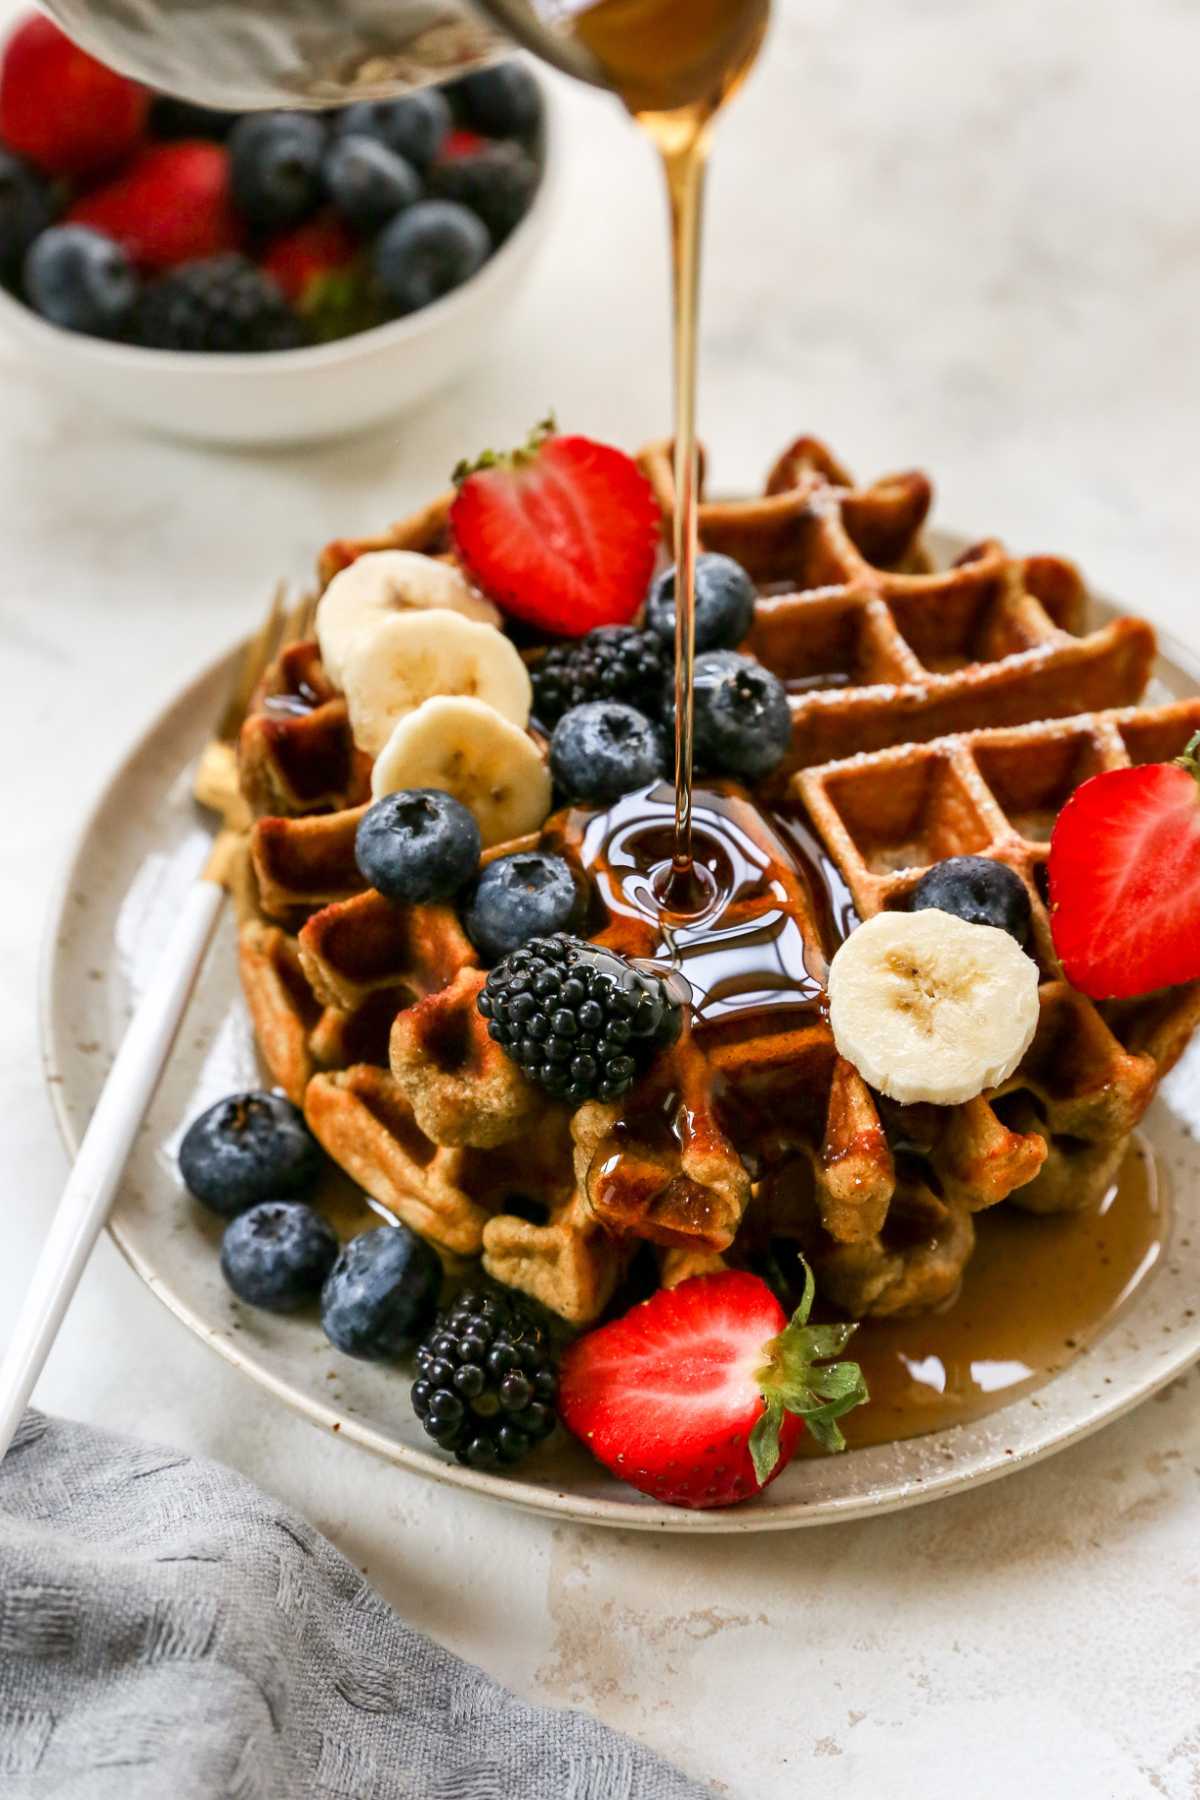 Drizzling maple syrup over a stack of waffles topped with fruit.